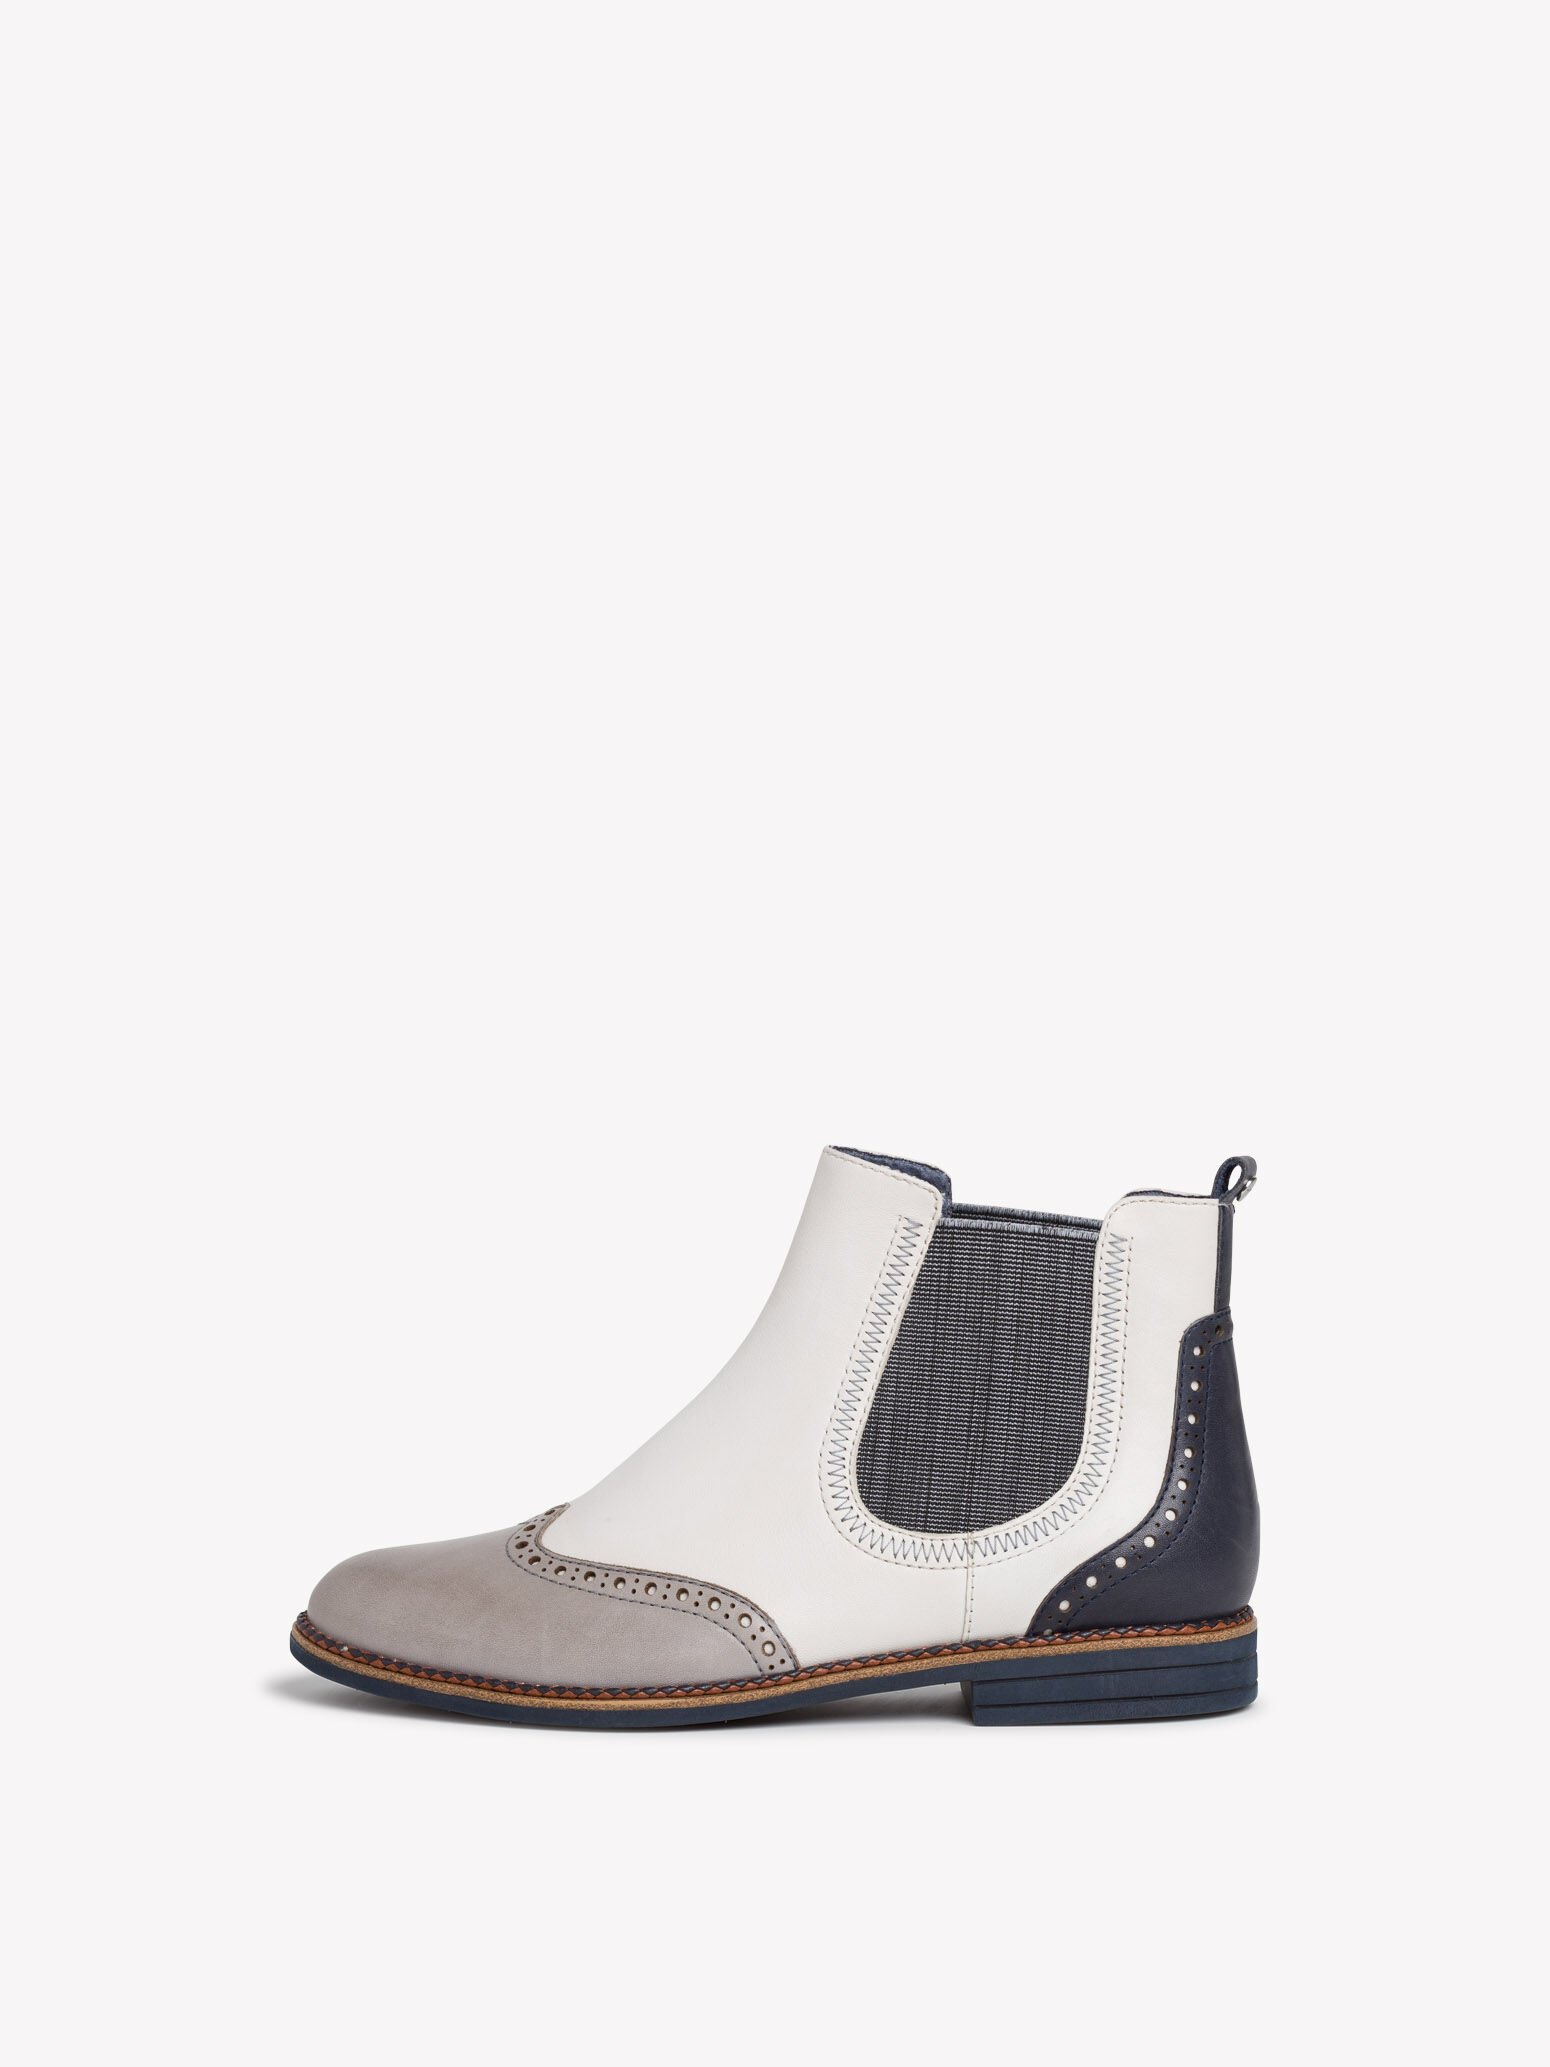 Leather Chelsea boot 1-1-25310-24: Buy 